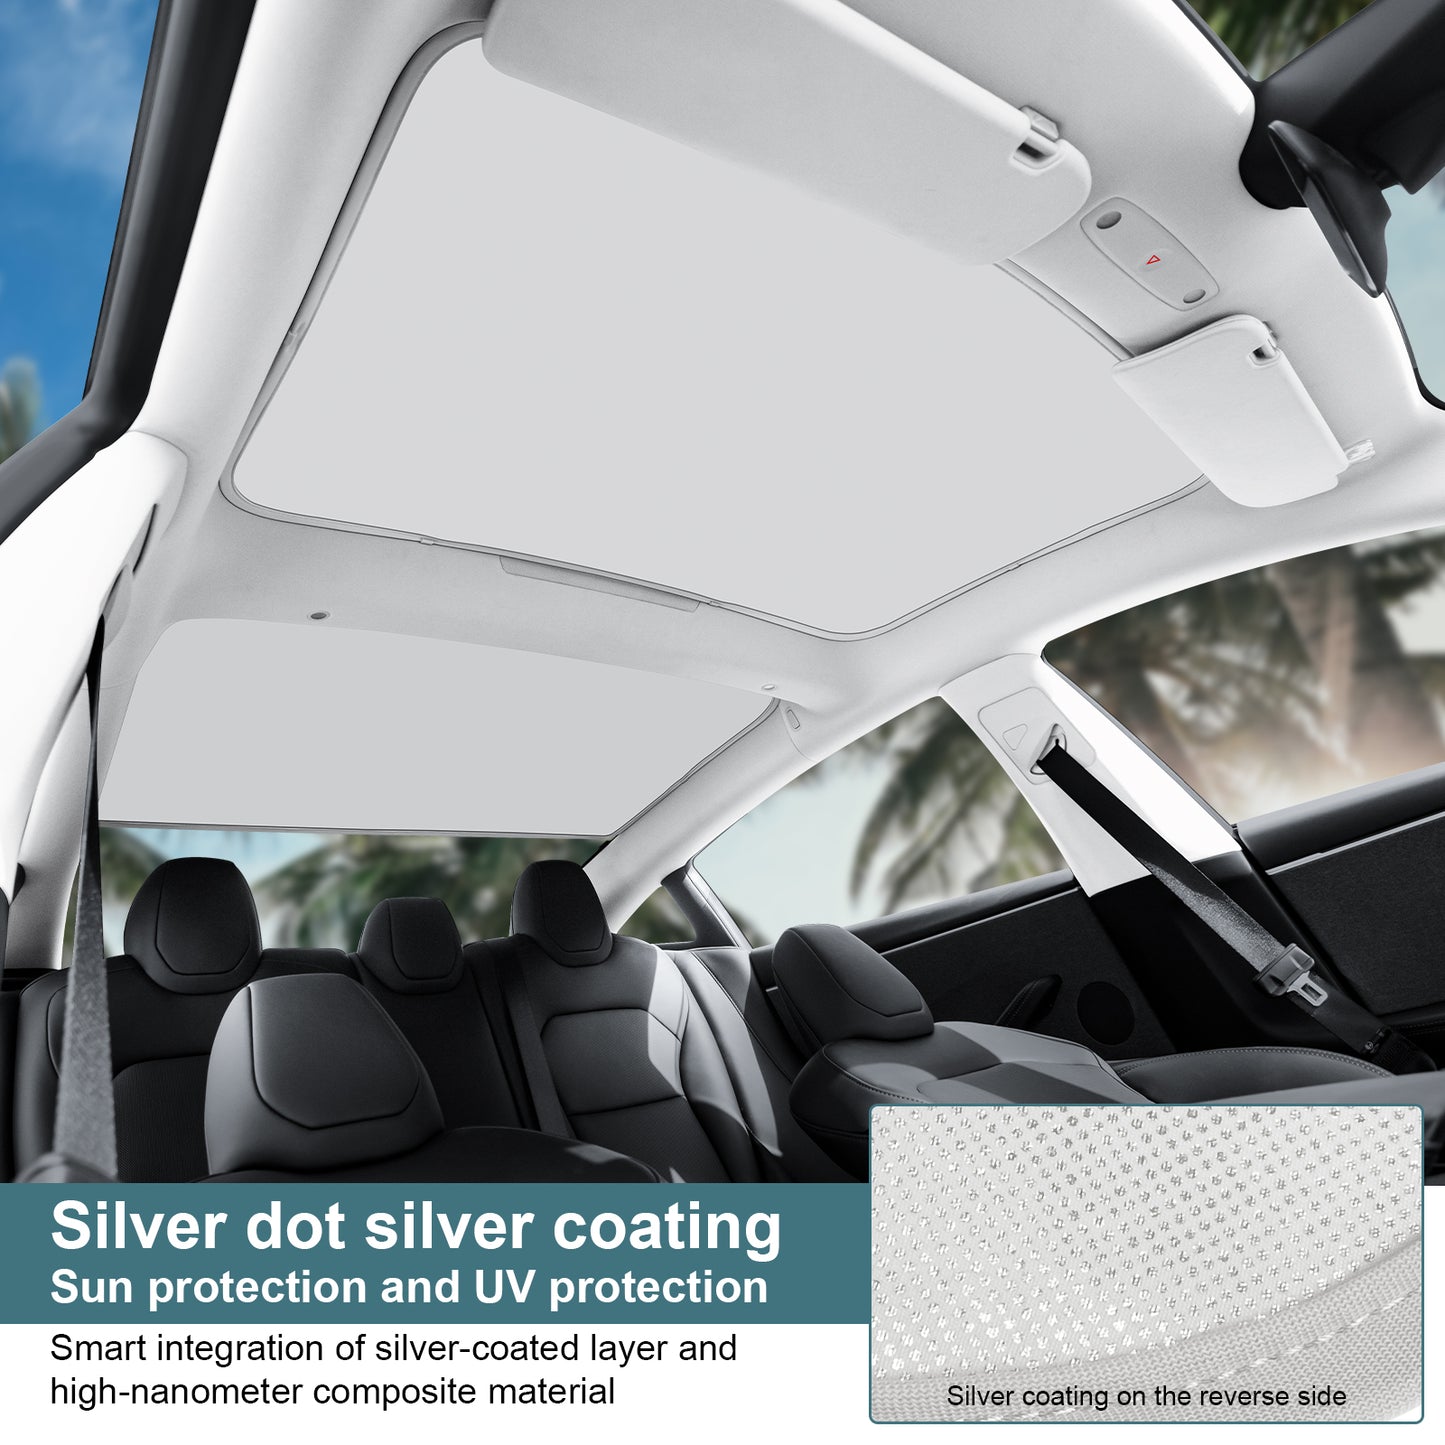 Roof Sunshades for New 2024 Tesla Model 3 Accessories